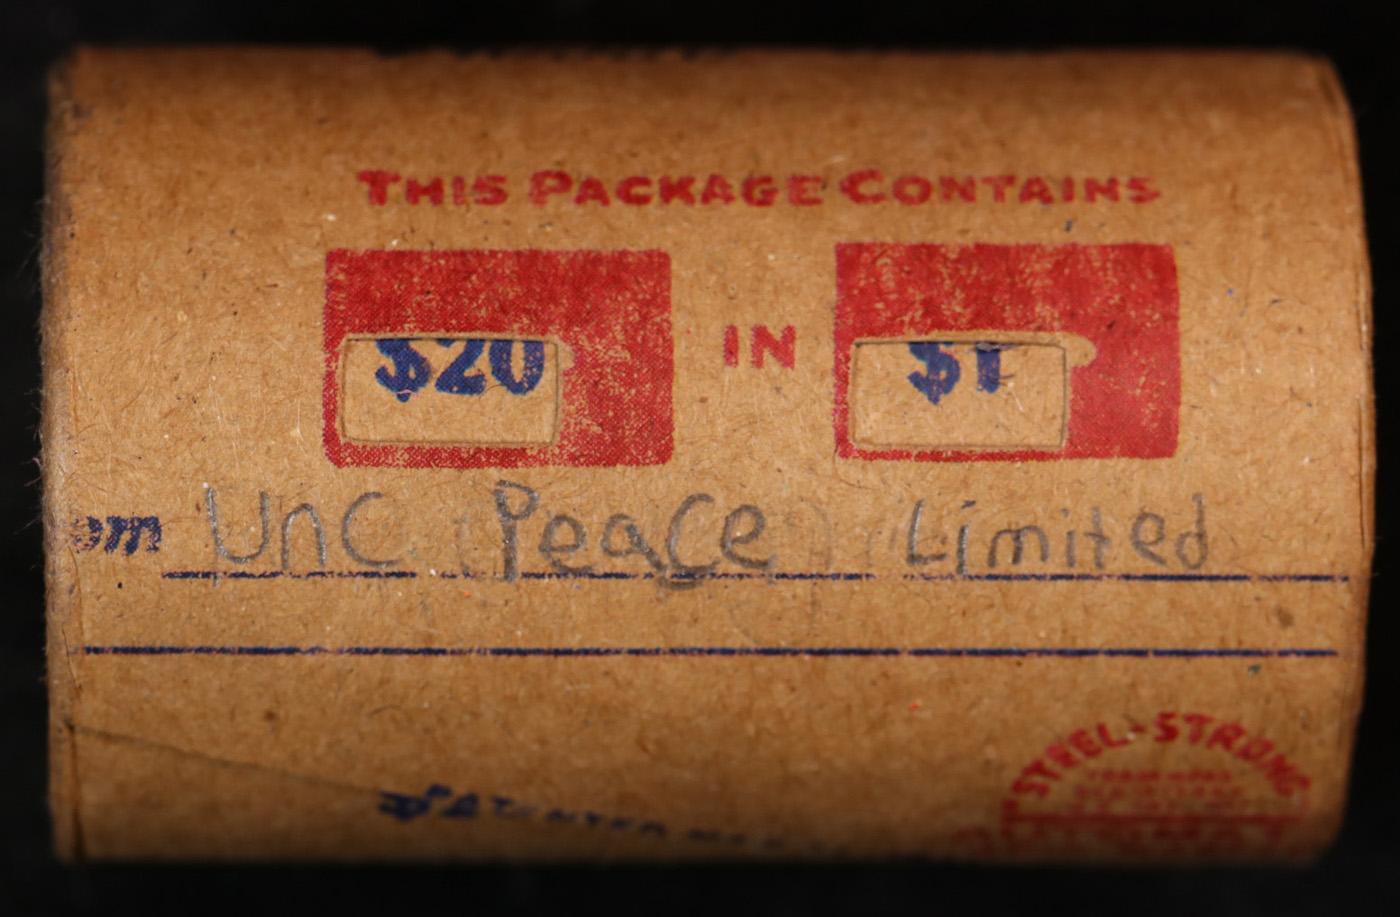 *Uncovered Hoard* - Covered End Roll - Marked "Unc Peace Limited" - Weight shows x20 Coins (FC)